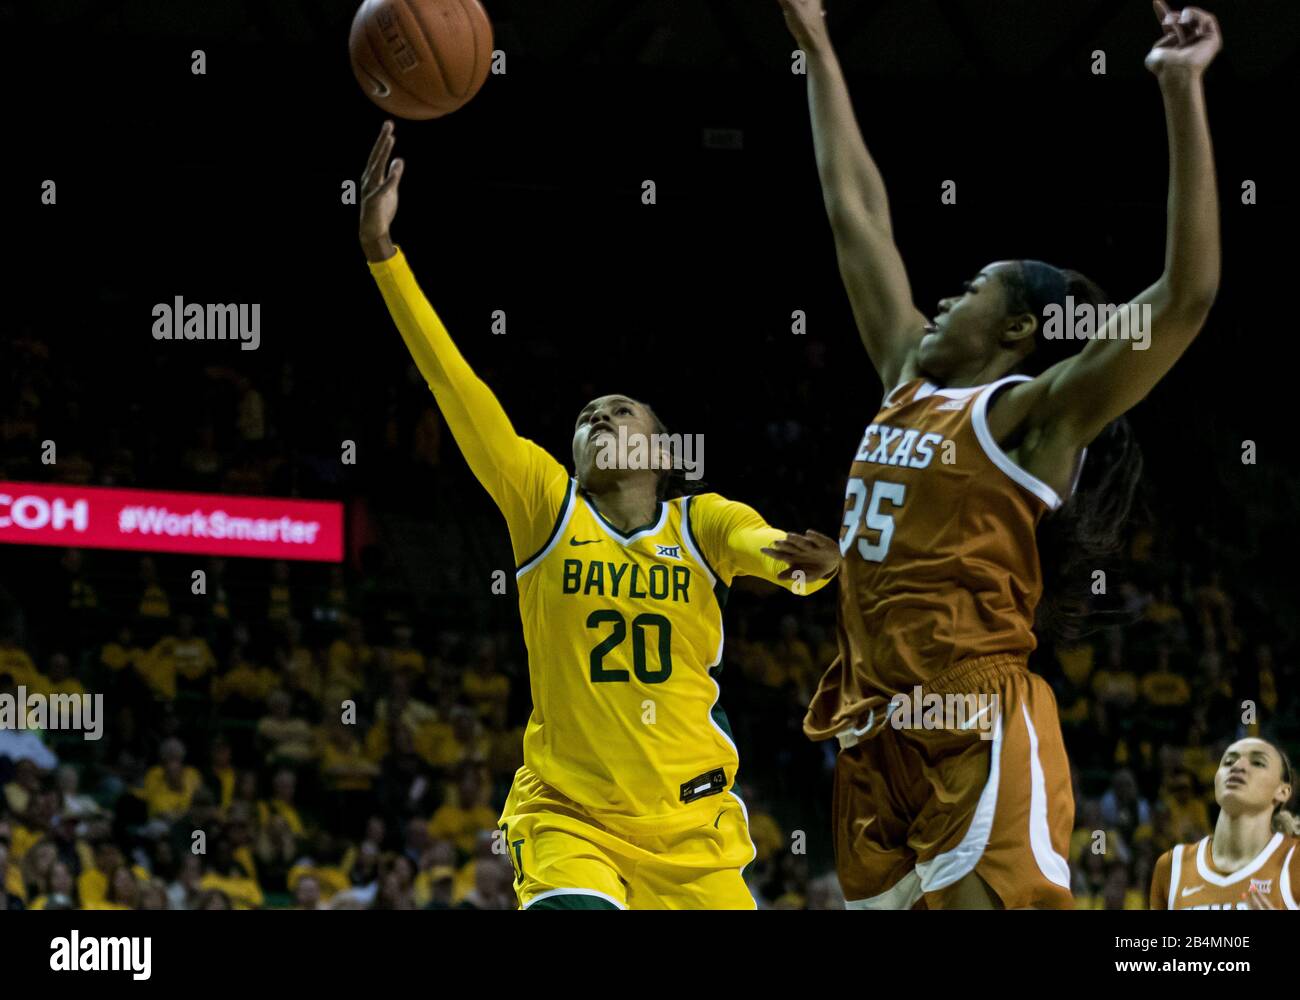 Waco, Texas, USA. 5th Mar, 2020. Baylor Lady Bears guard Juicy Landrum (20) shoots the ball against Texas Longhorns forward Charli Collier (35) during the 2nd half of the NCAA Women's Basketball game between Texas Longhorns and the Baylor Lady Bears at The Ferrell Center in Waco, Texas. Matthew Lynch/CSM/Alamy Live News Stock Photo